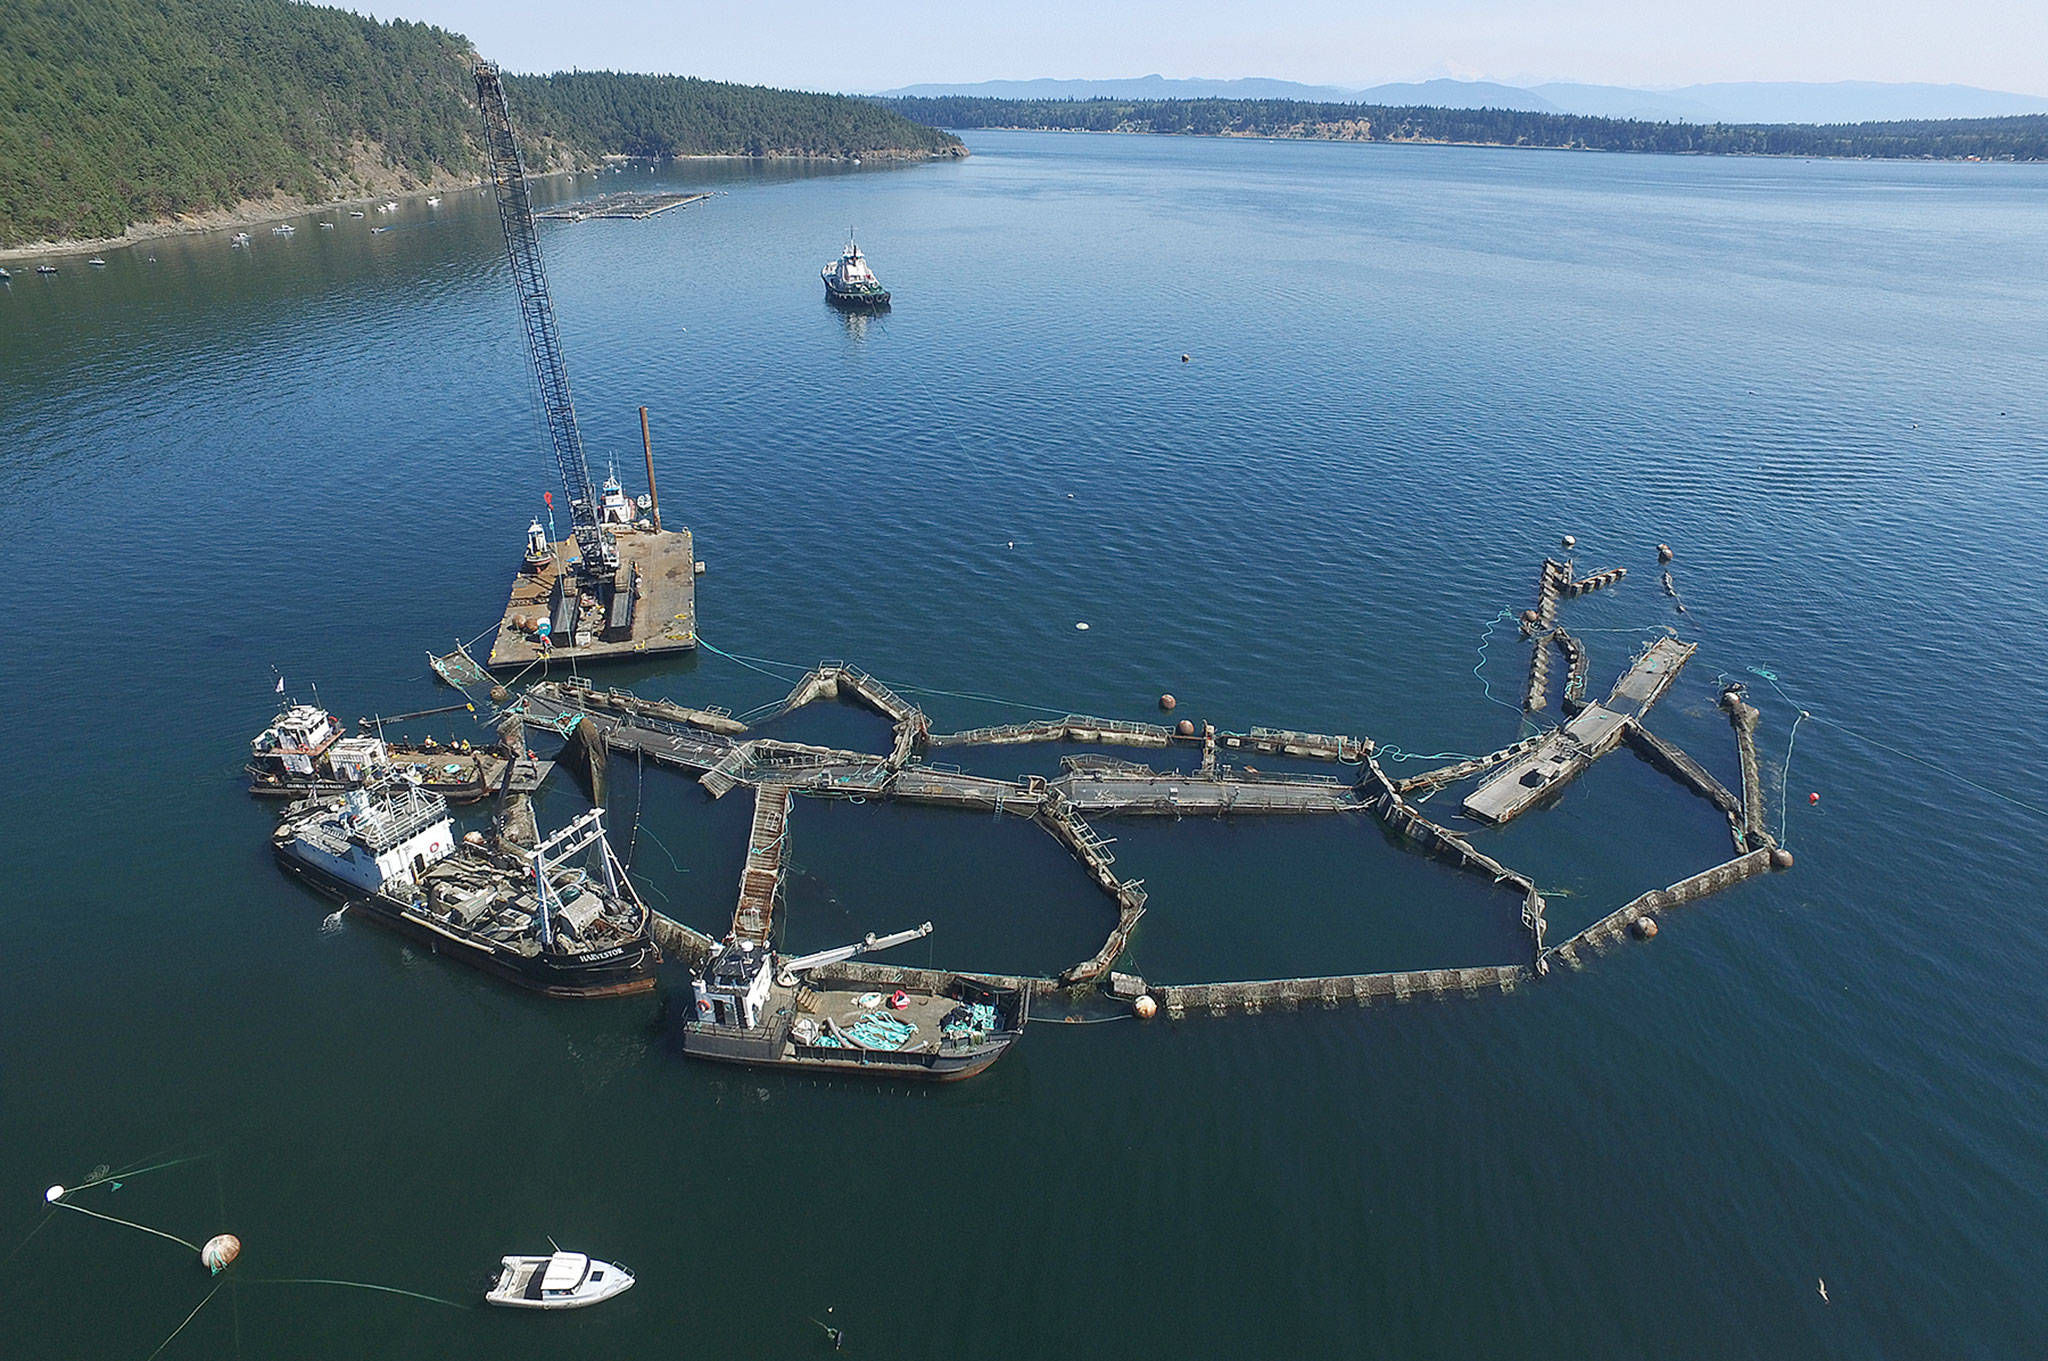 The collapsed net pen used by Cooke Aquaculture Pacific to farm Atlantic Salmon near Cypress Island, seen here in August 2017. (David Bergvall/Washington State Department of Natural Resources via AP)